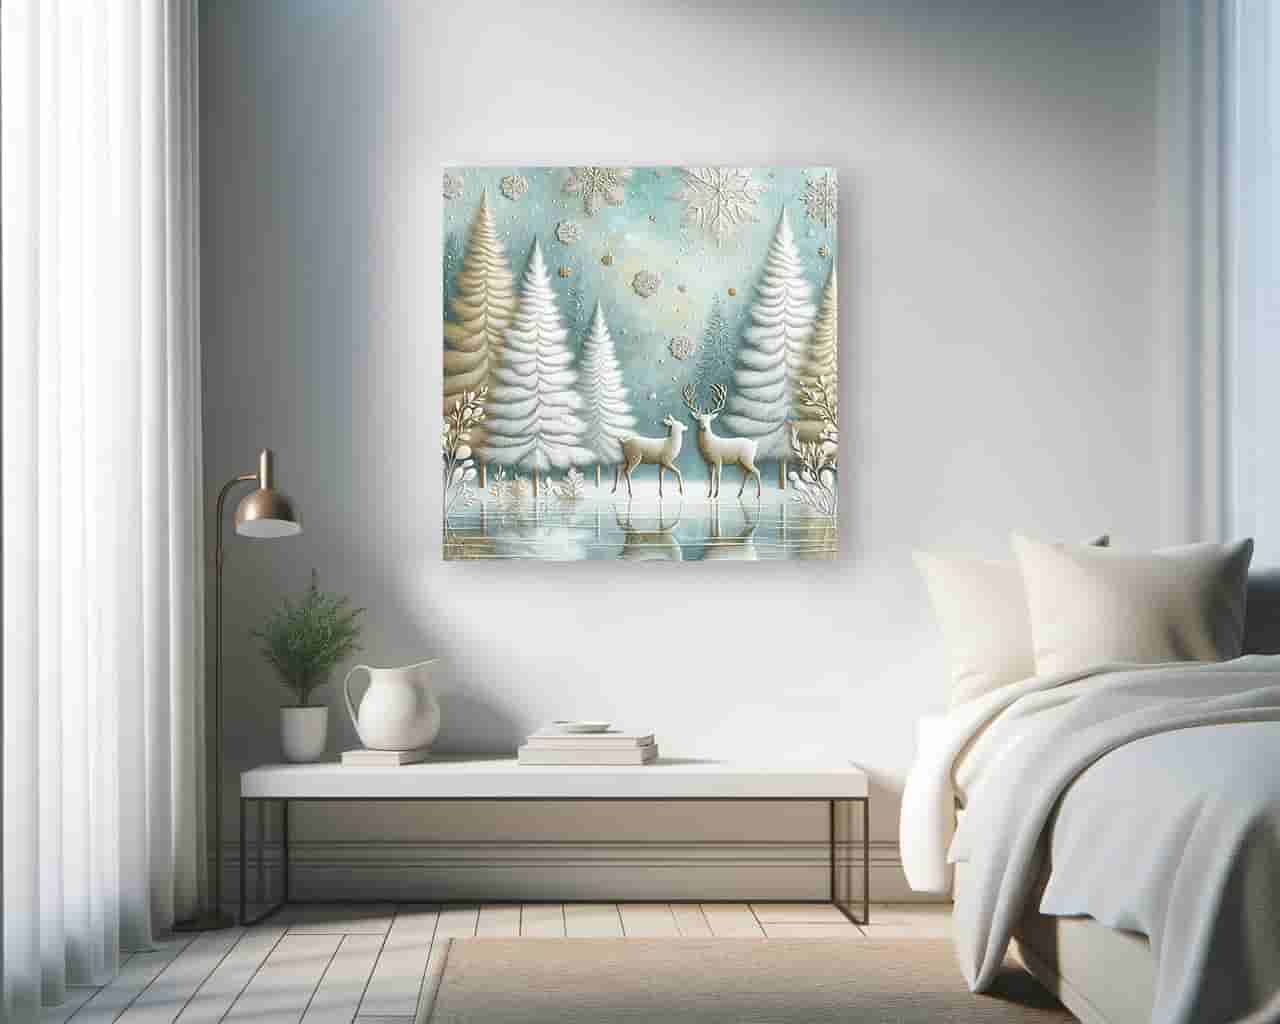 "Enchanted Winter Calm - Snowy Forest with Deer" Wrapped Canvas Wall Art Prints